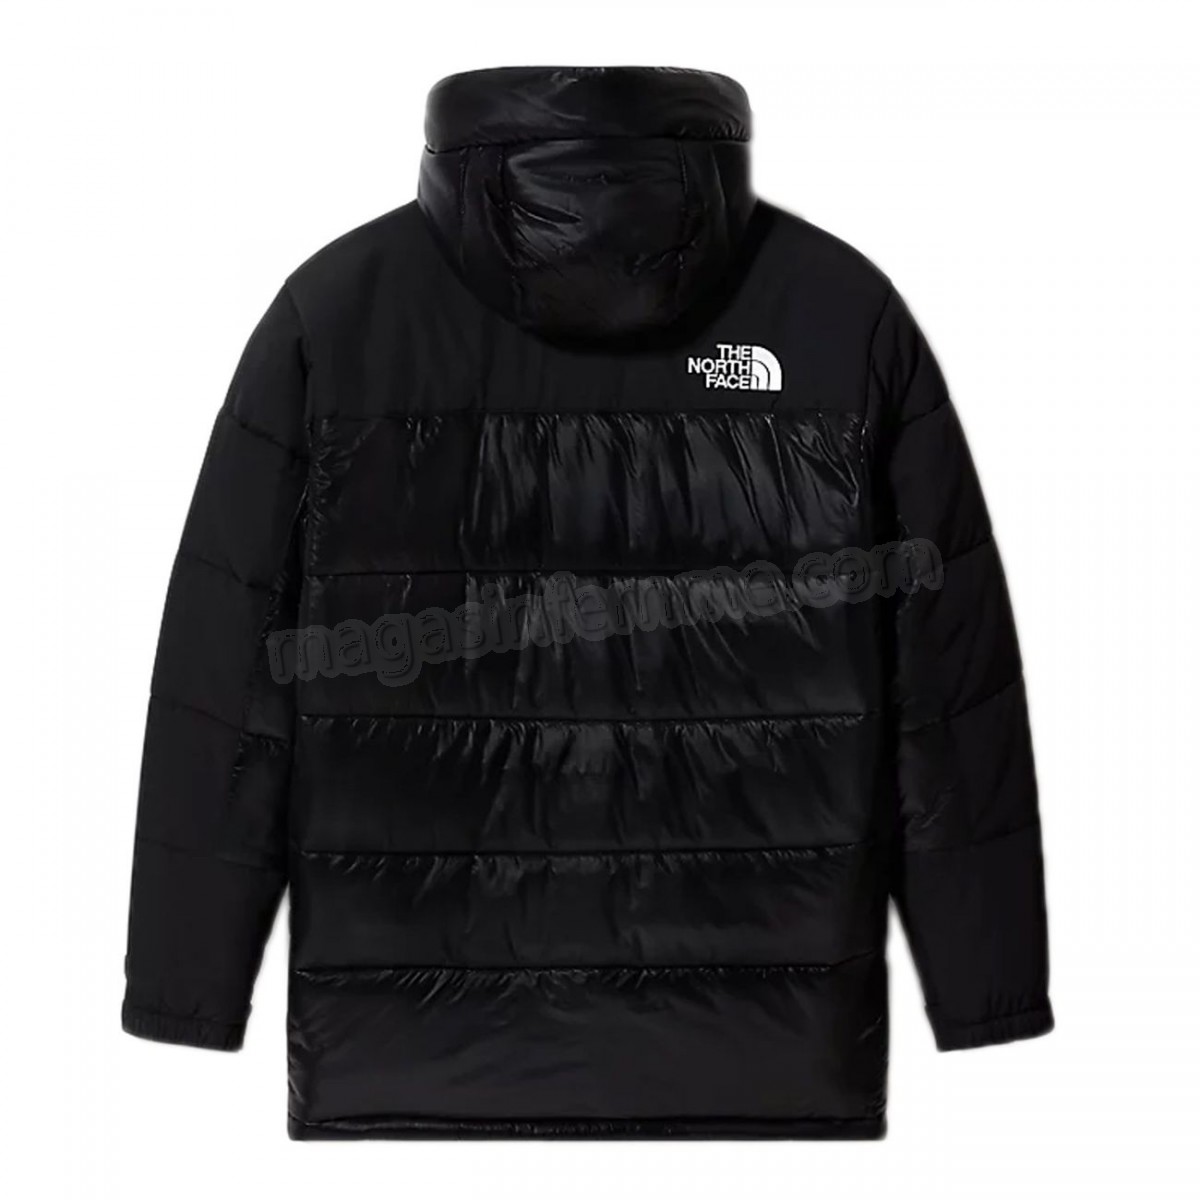 The North Face-mode homme THE NORTH FACE Himalayan Insulated Parka en solde - -11